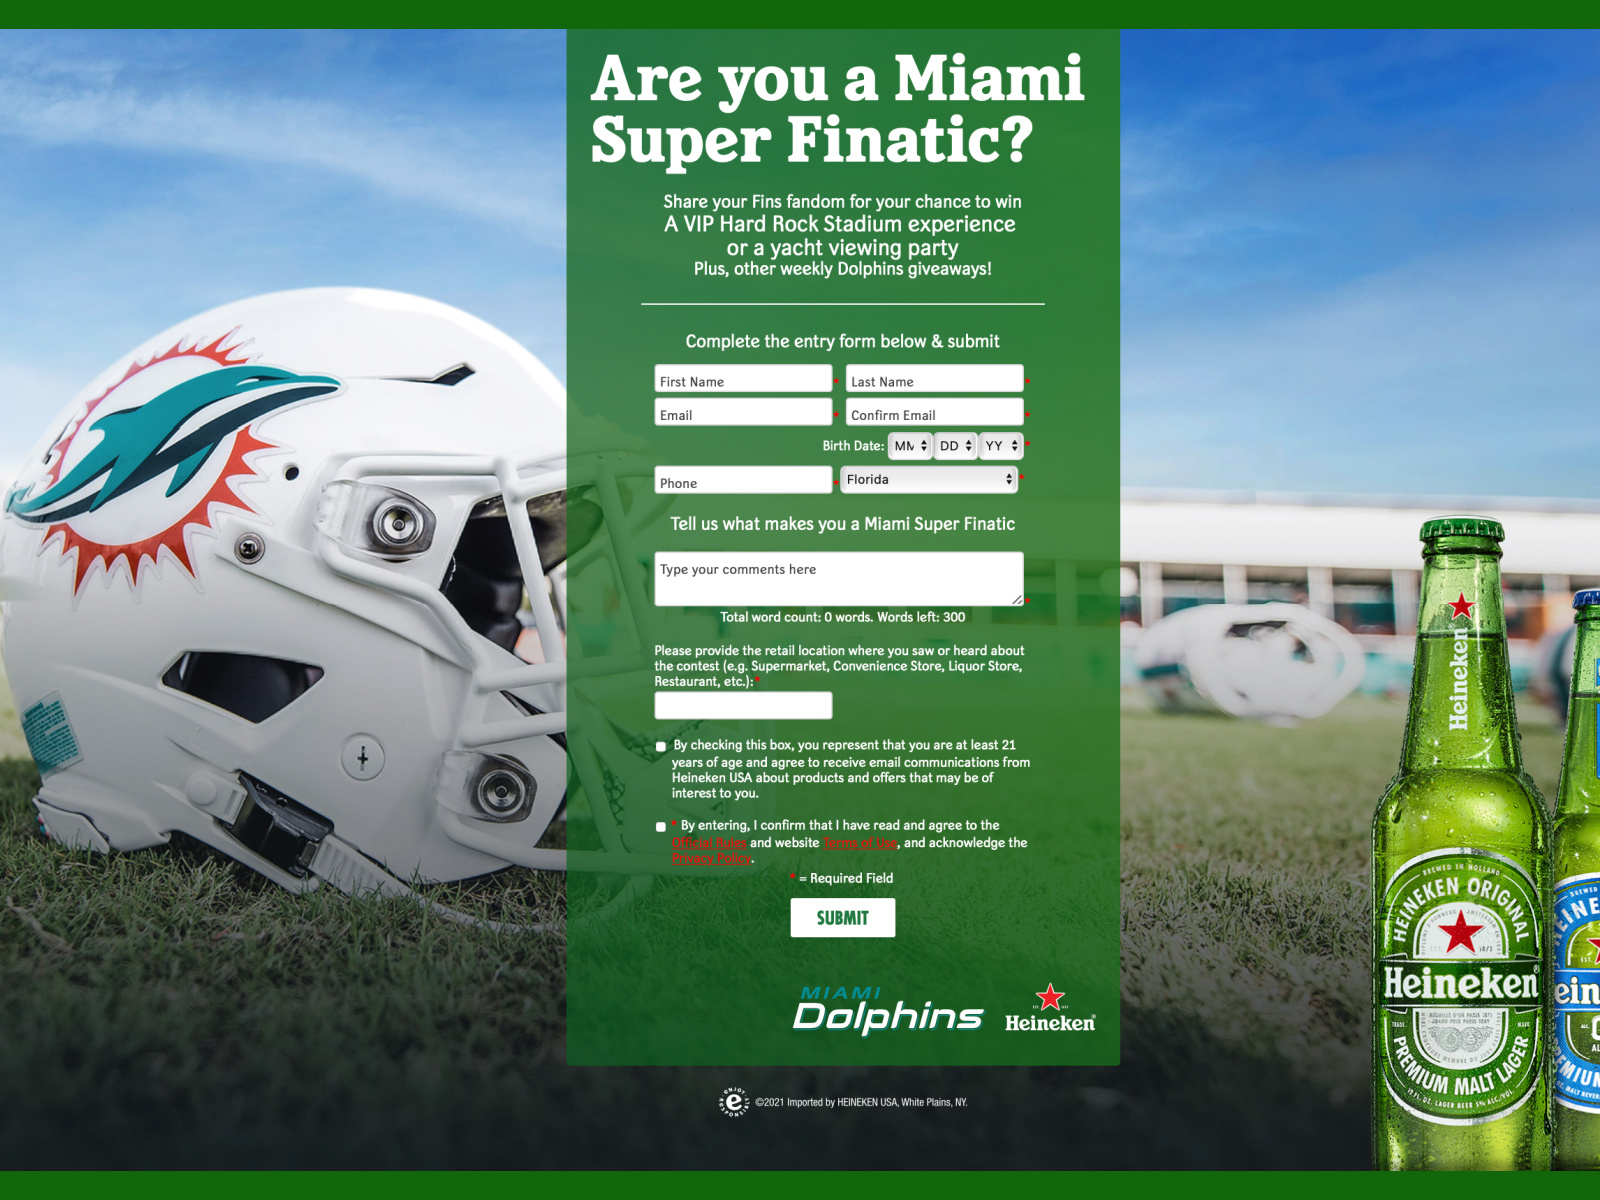 Still Time To Enter The Heineken Miami Super FINatics Sweeptakes To Win VIP Tickets To See The Fins (Florida Residents Only)